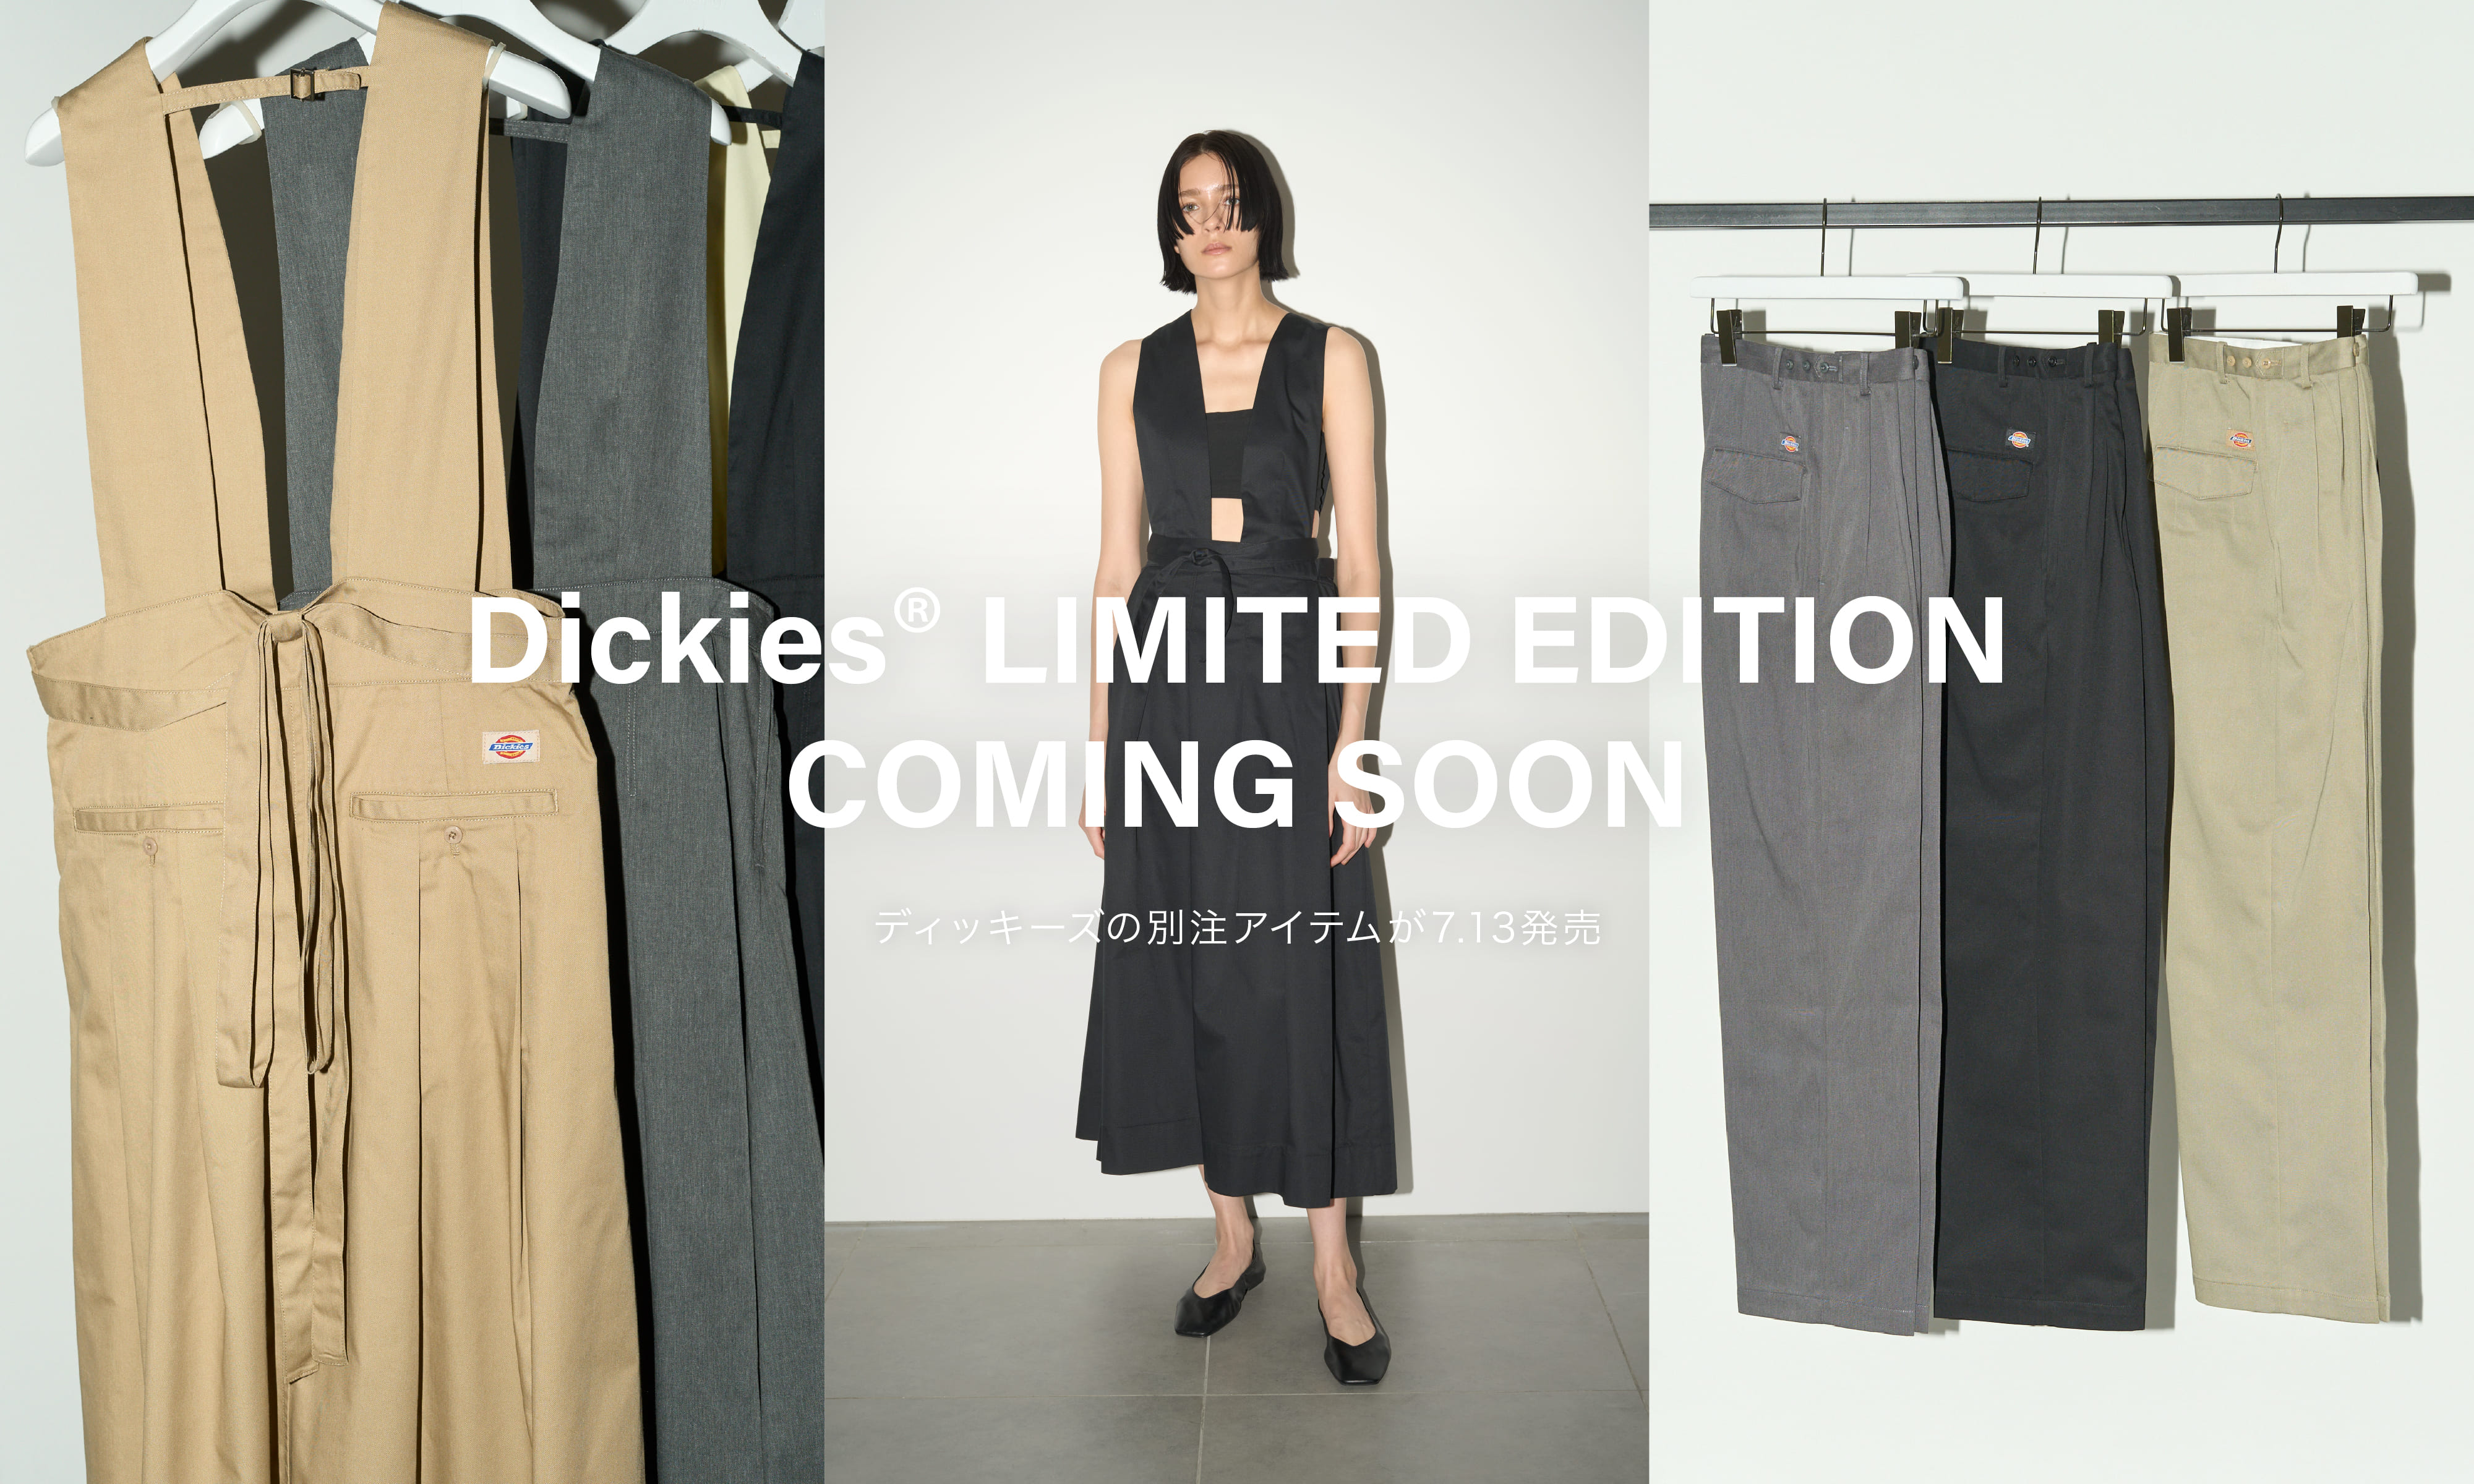 Dickies® LIMITED EDITION       COMING SOON